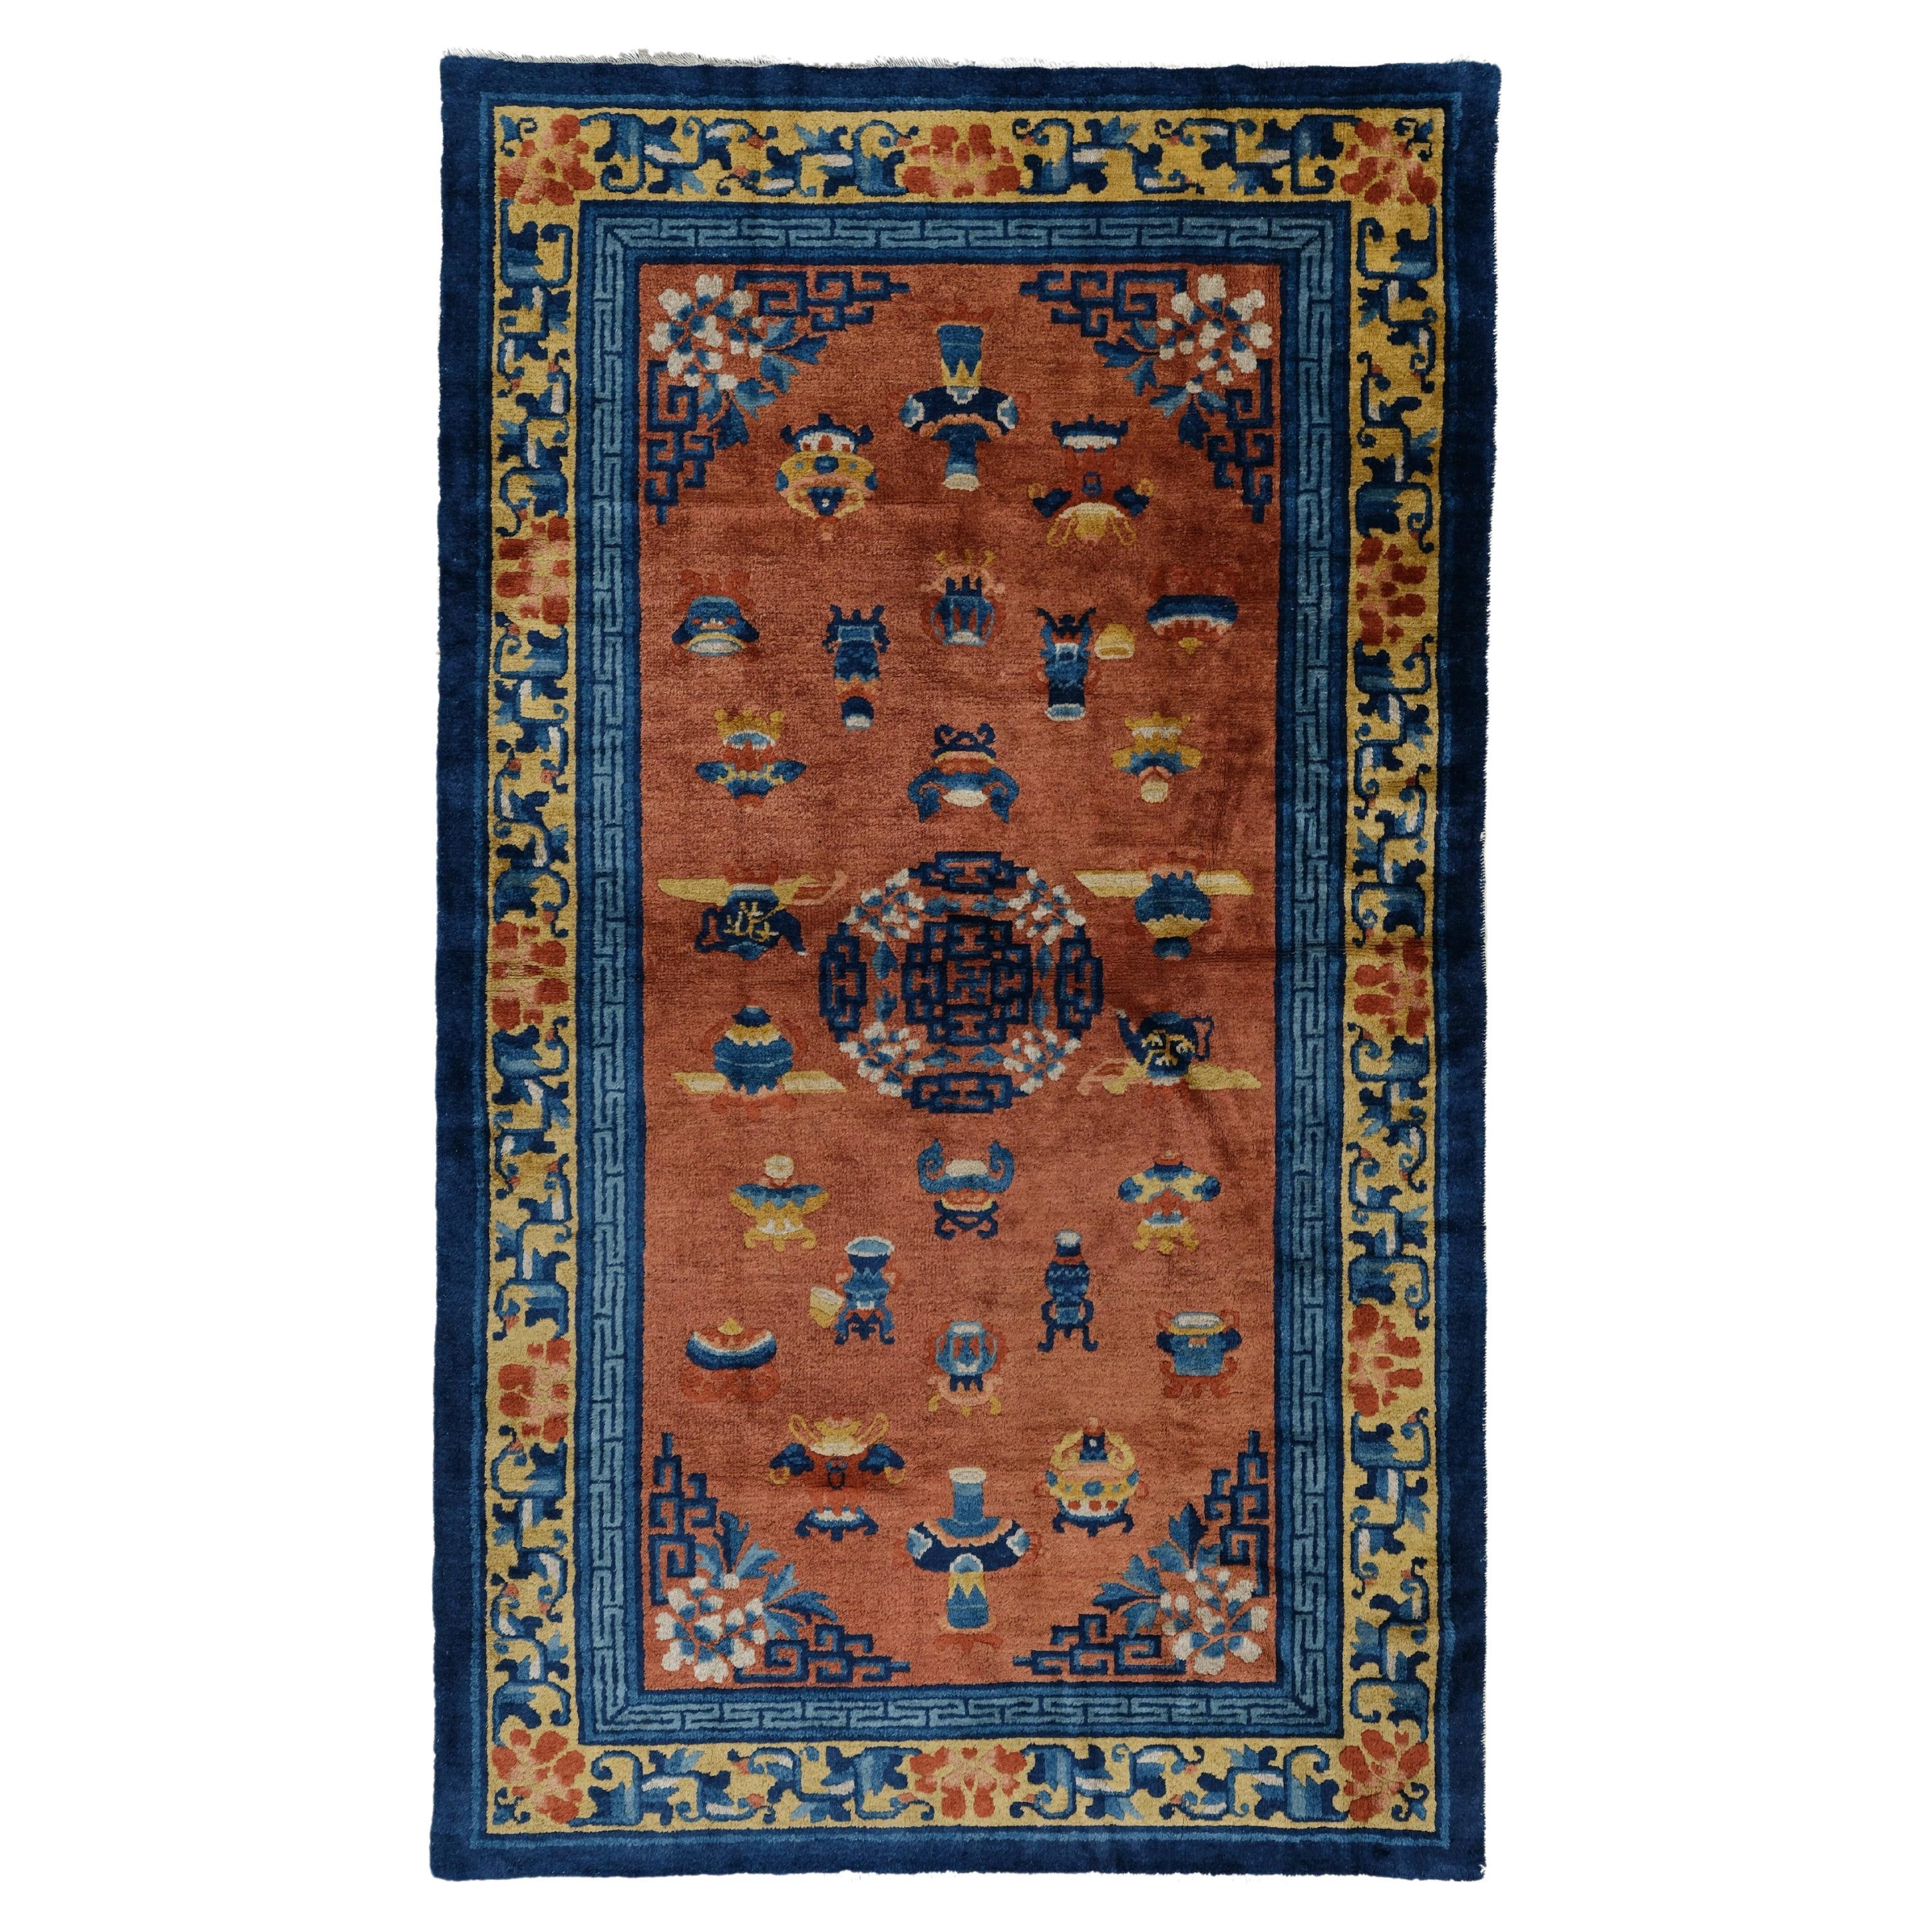 Antique Chinese Rug - 19th Century Asian Rug, Antique Rug, Handmade Wool Rug For Sale